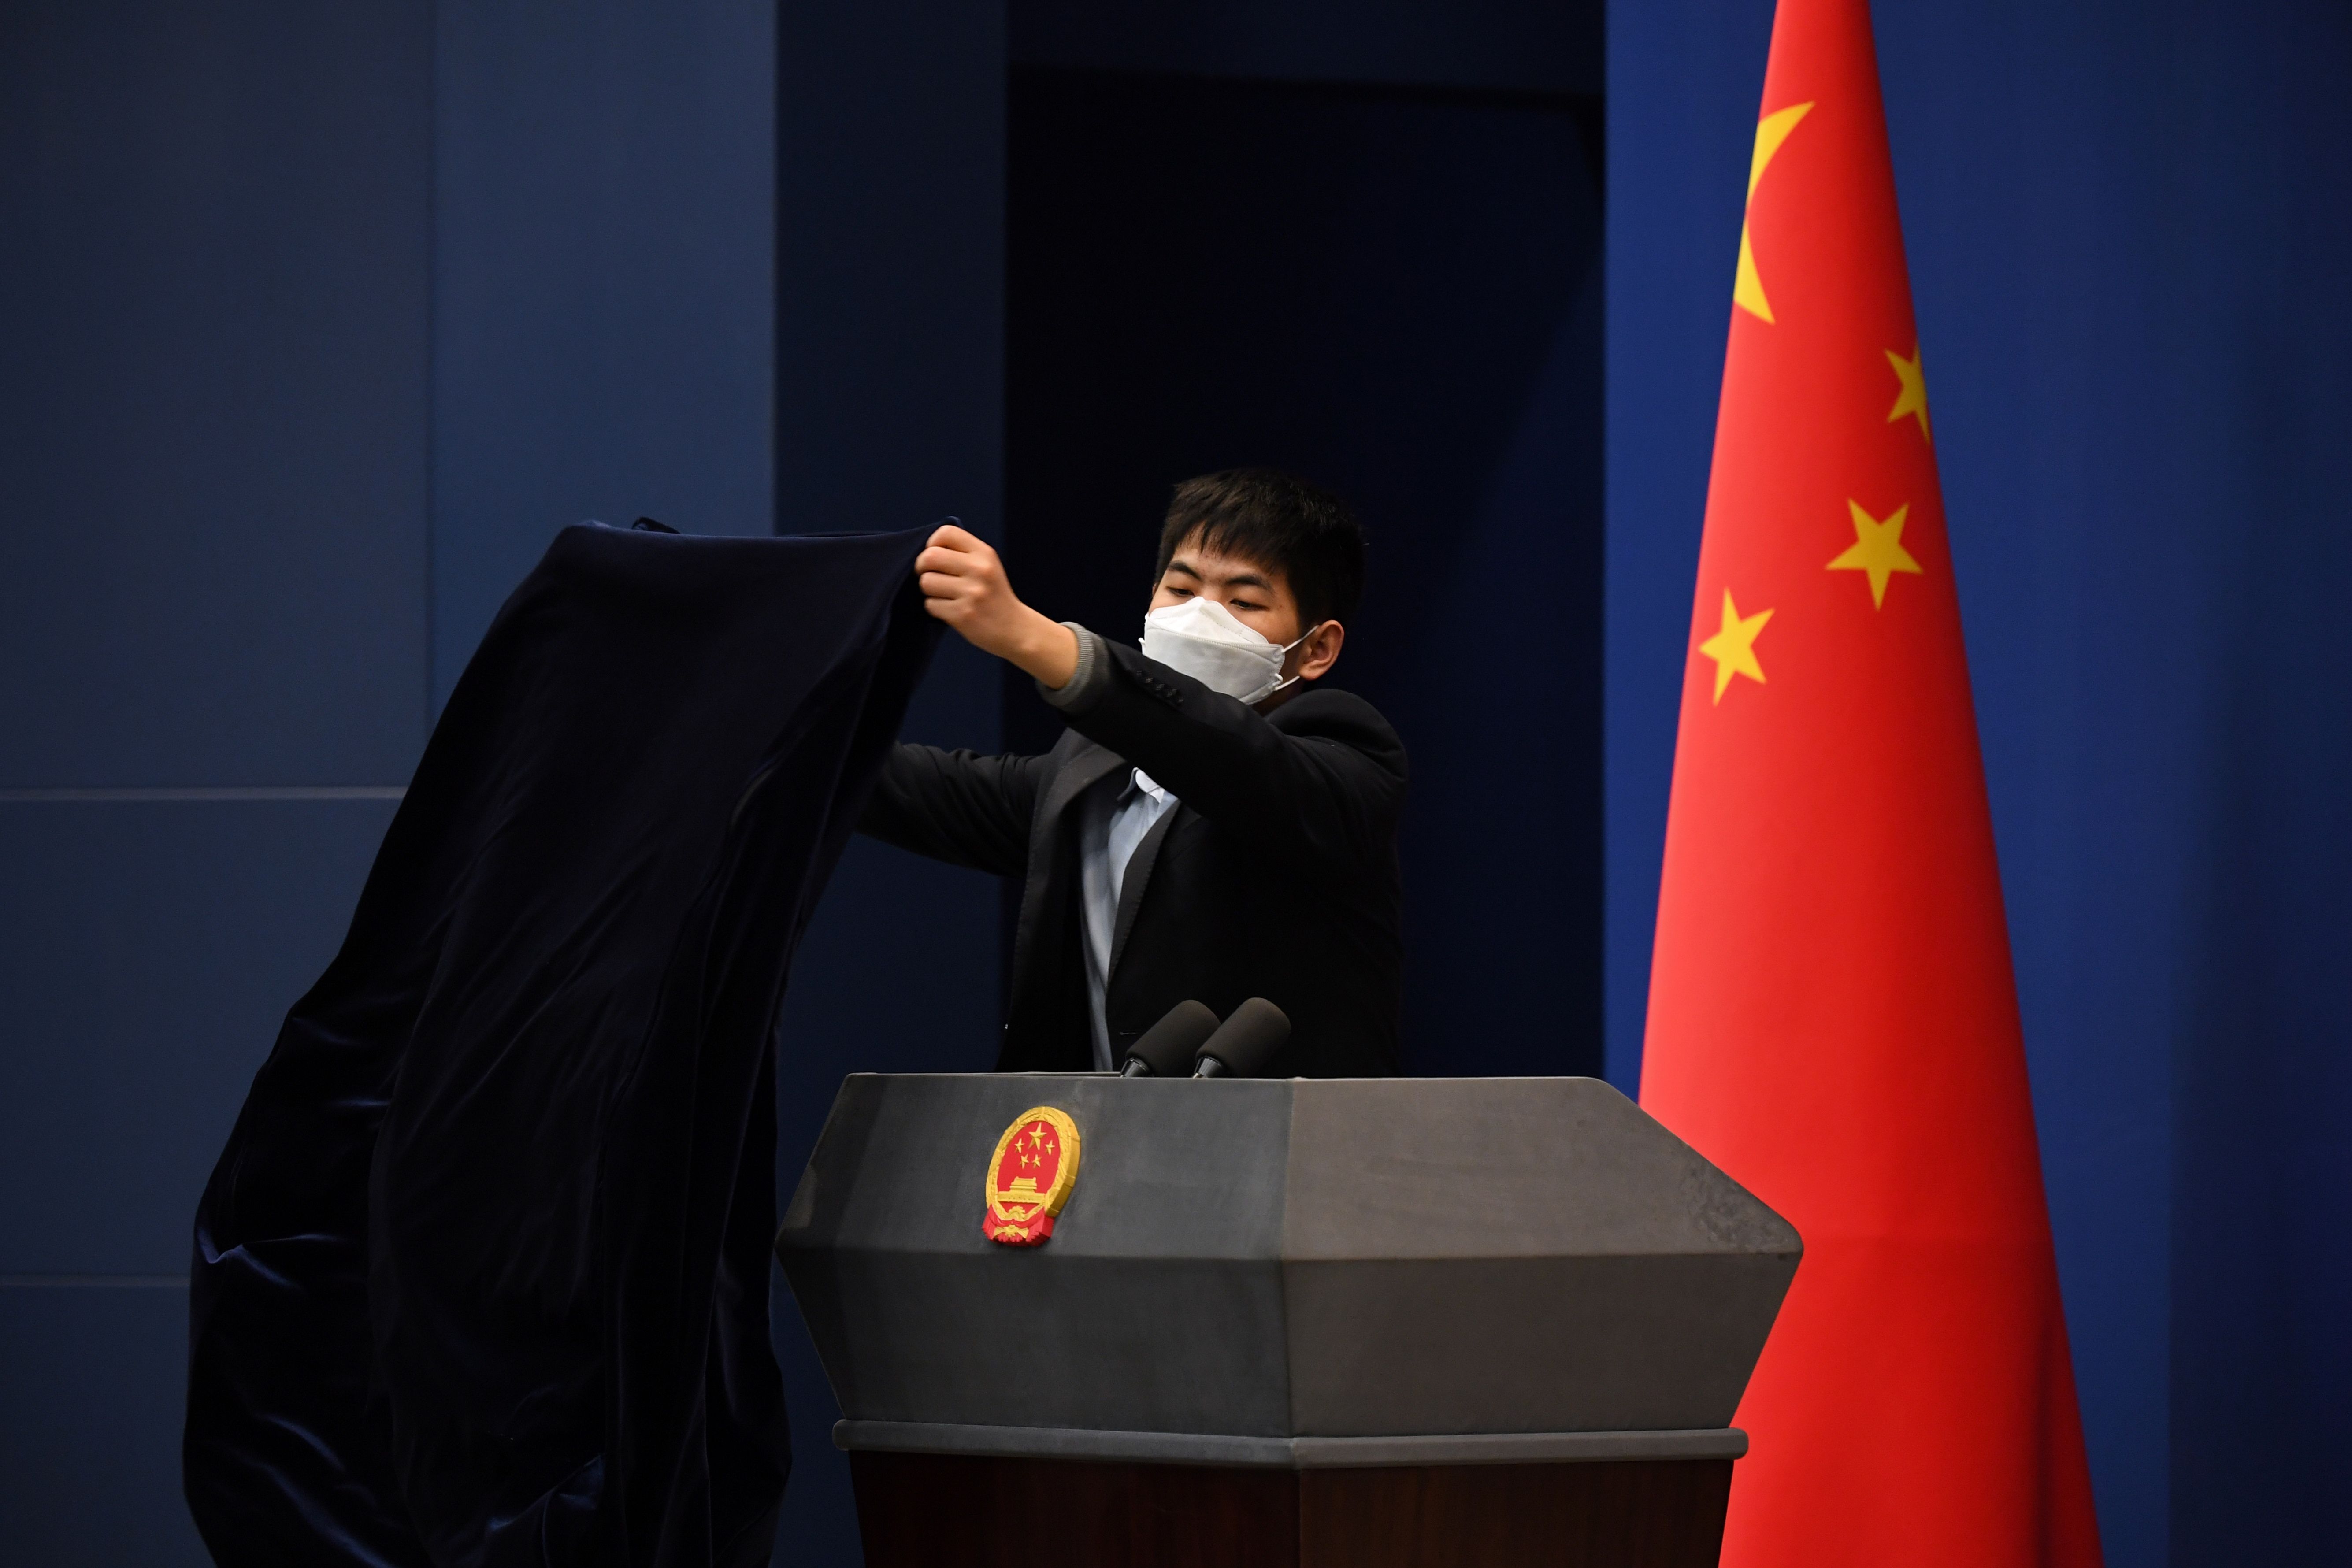 A worker wears a mask as a preventive measure against the COVID-19 coronavirus as he covers the podium after the daily media briefing at the Foreign Ministry in Beijing on March 18, 2020. (GREG BAKER/AFP via Getty Images)